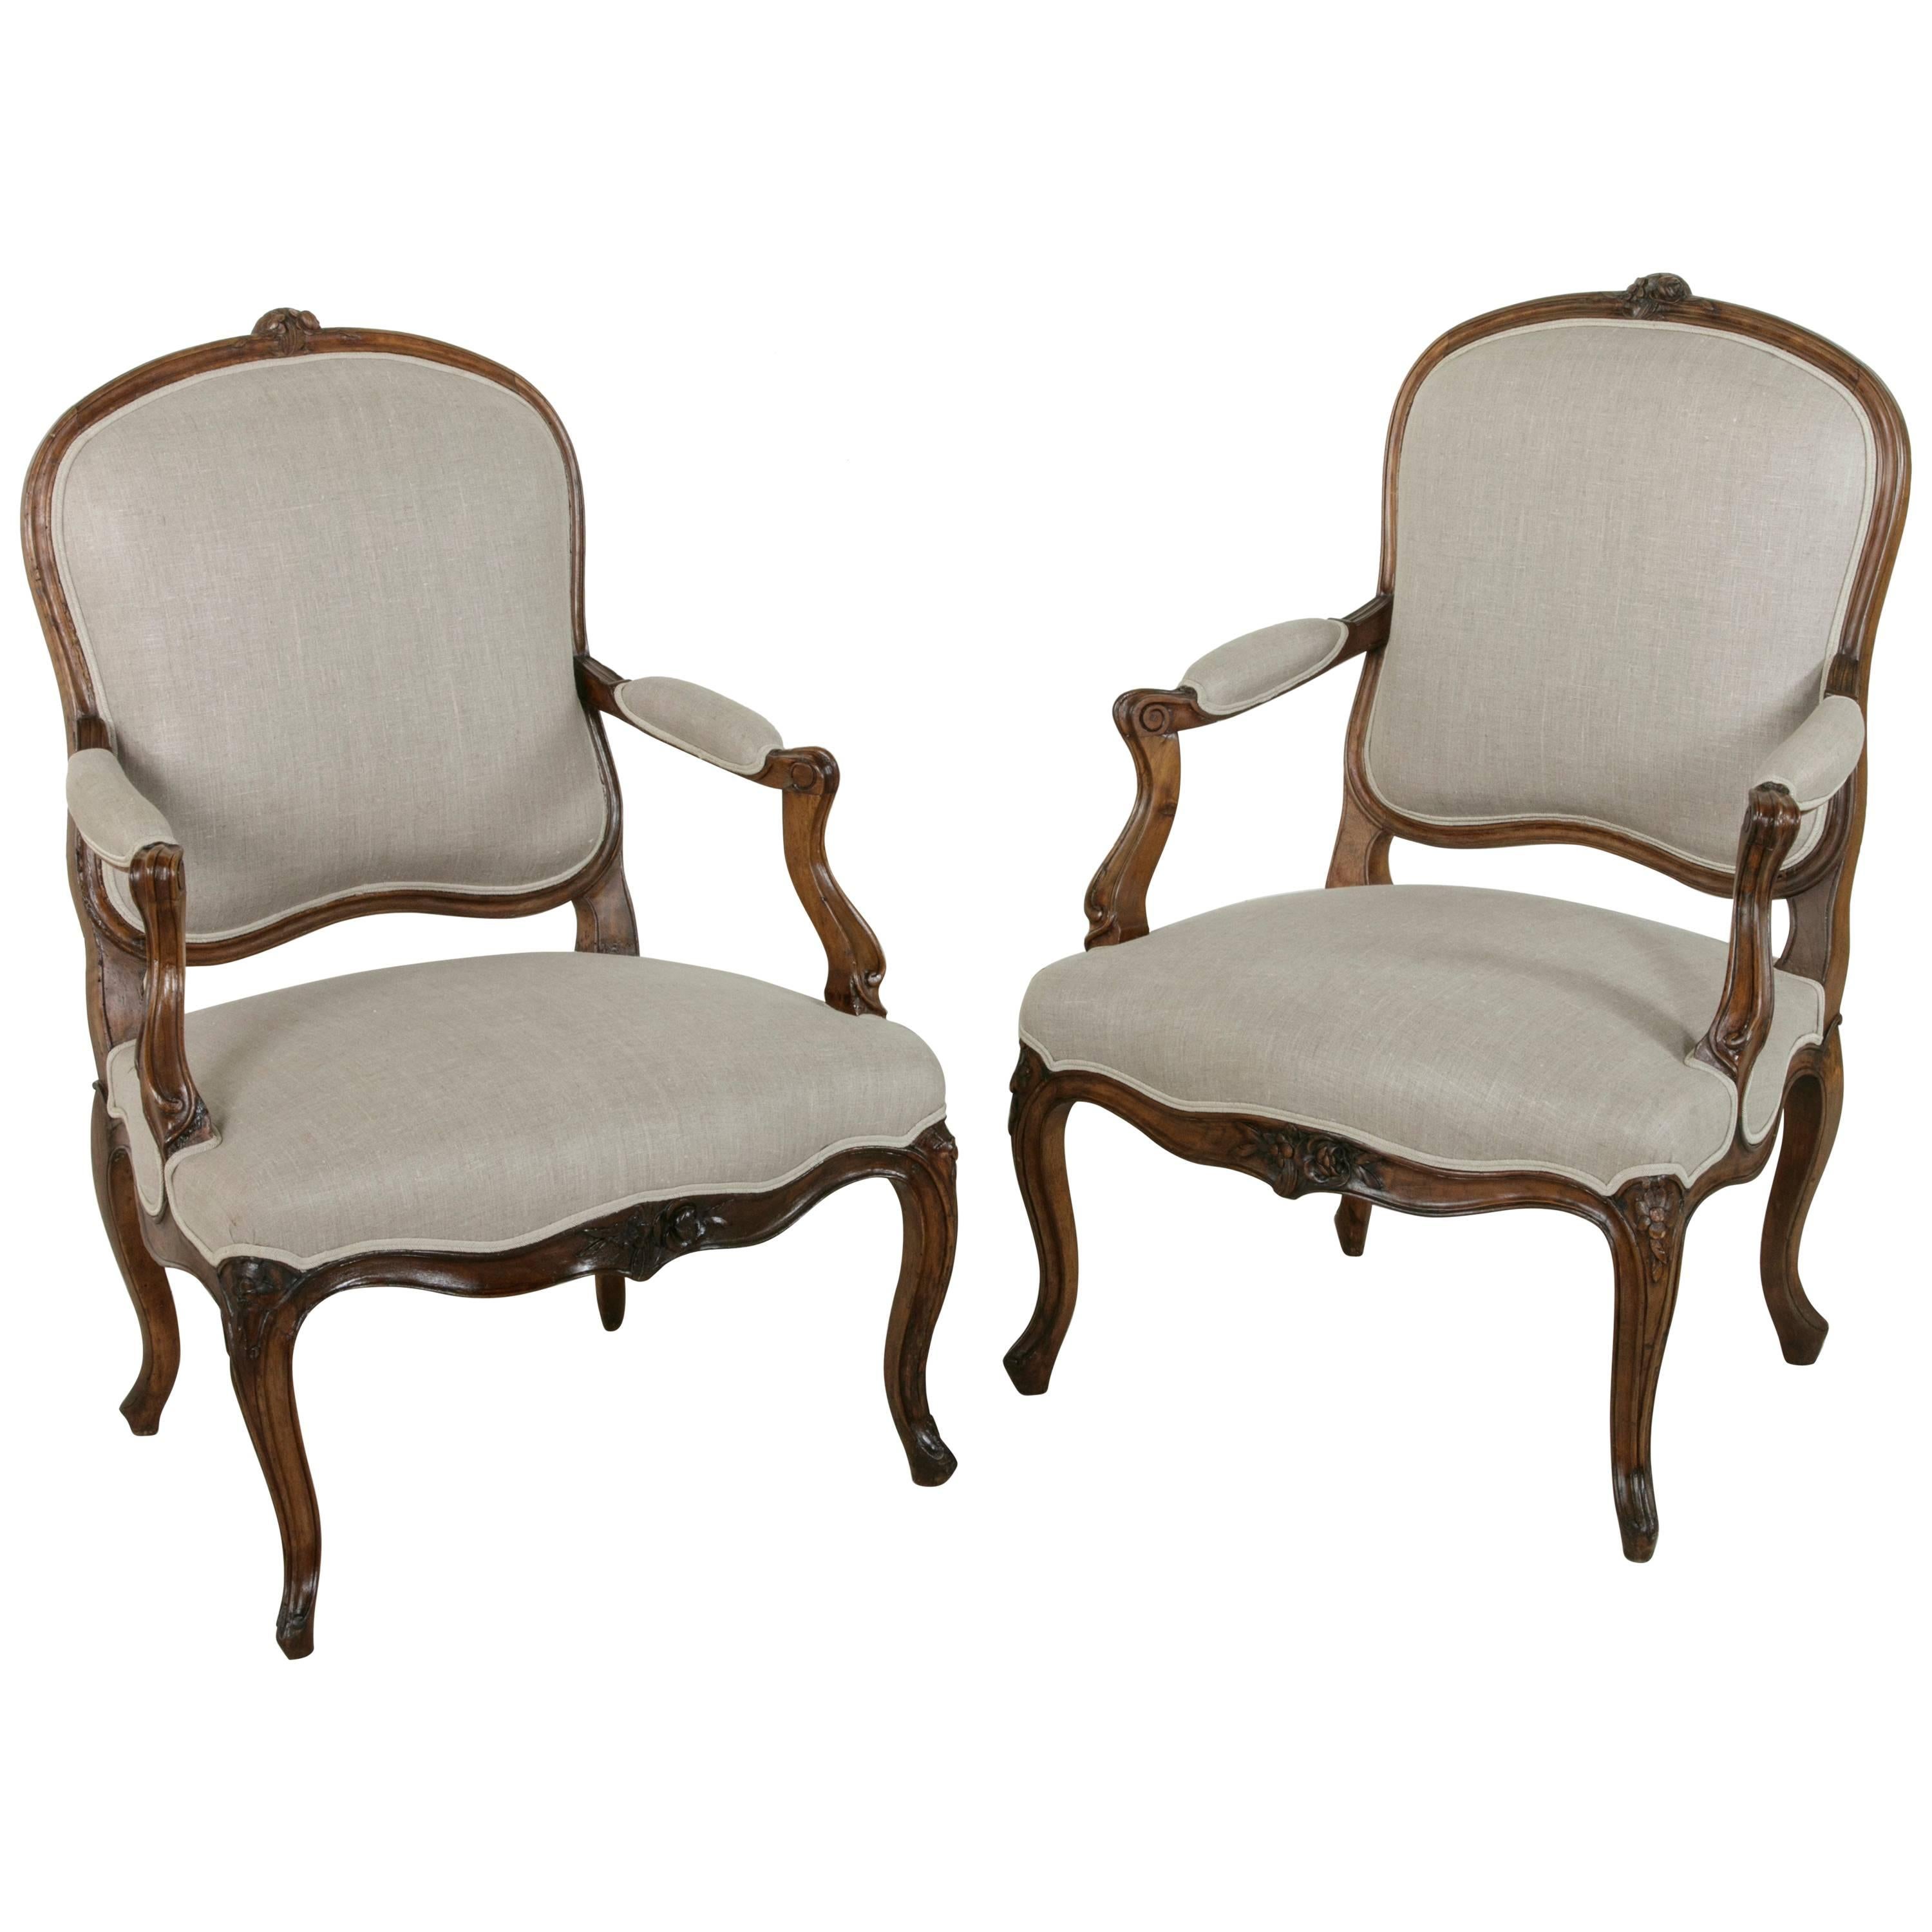 Pair of 19th Century Hand Carved Walnut French Louis XV Style Armchairs in Linen